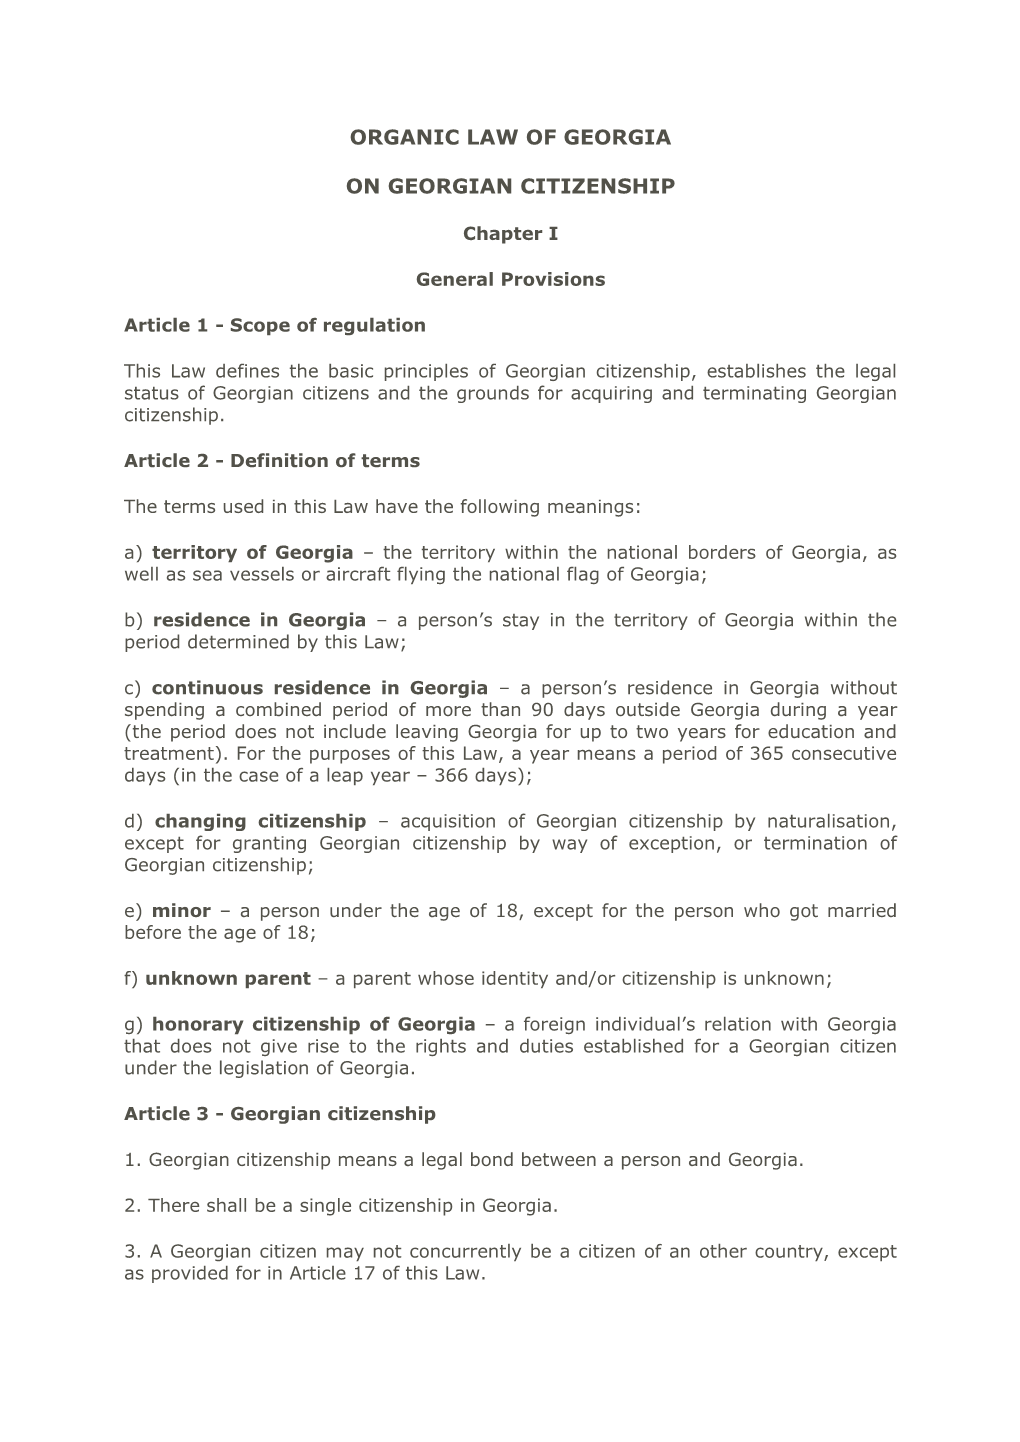 Organic Law of Georgia on Georgian Citizenship of 25 March 1993 (The Gazette of the Parliament of Georgia, No 5, March 1993, Art